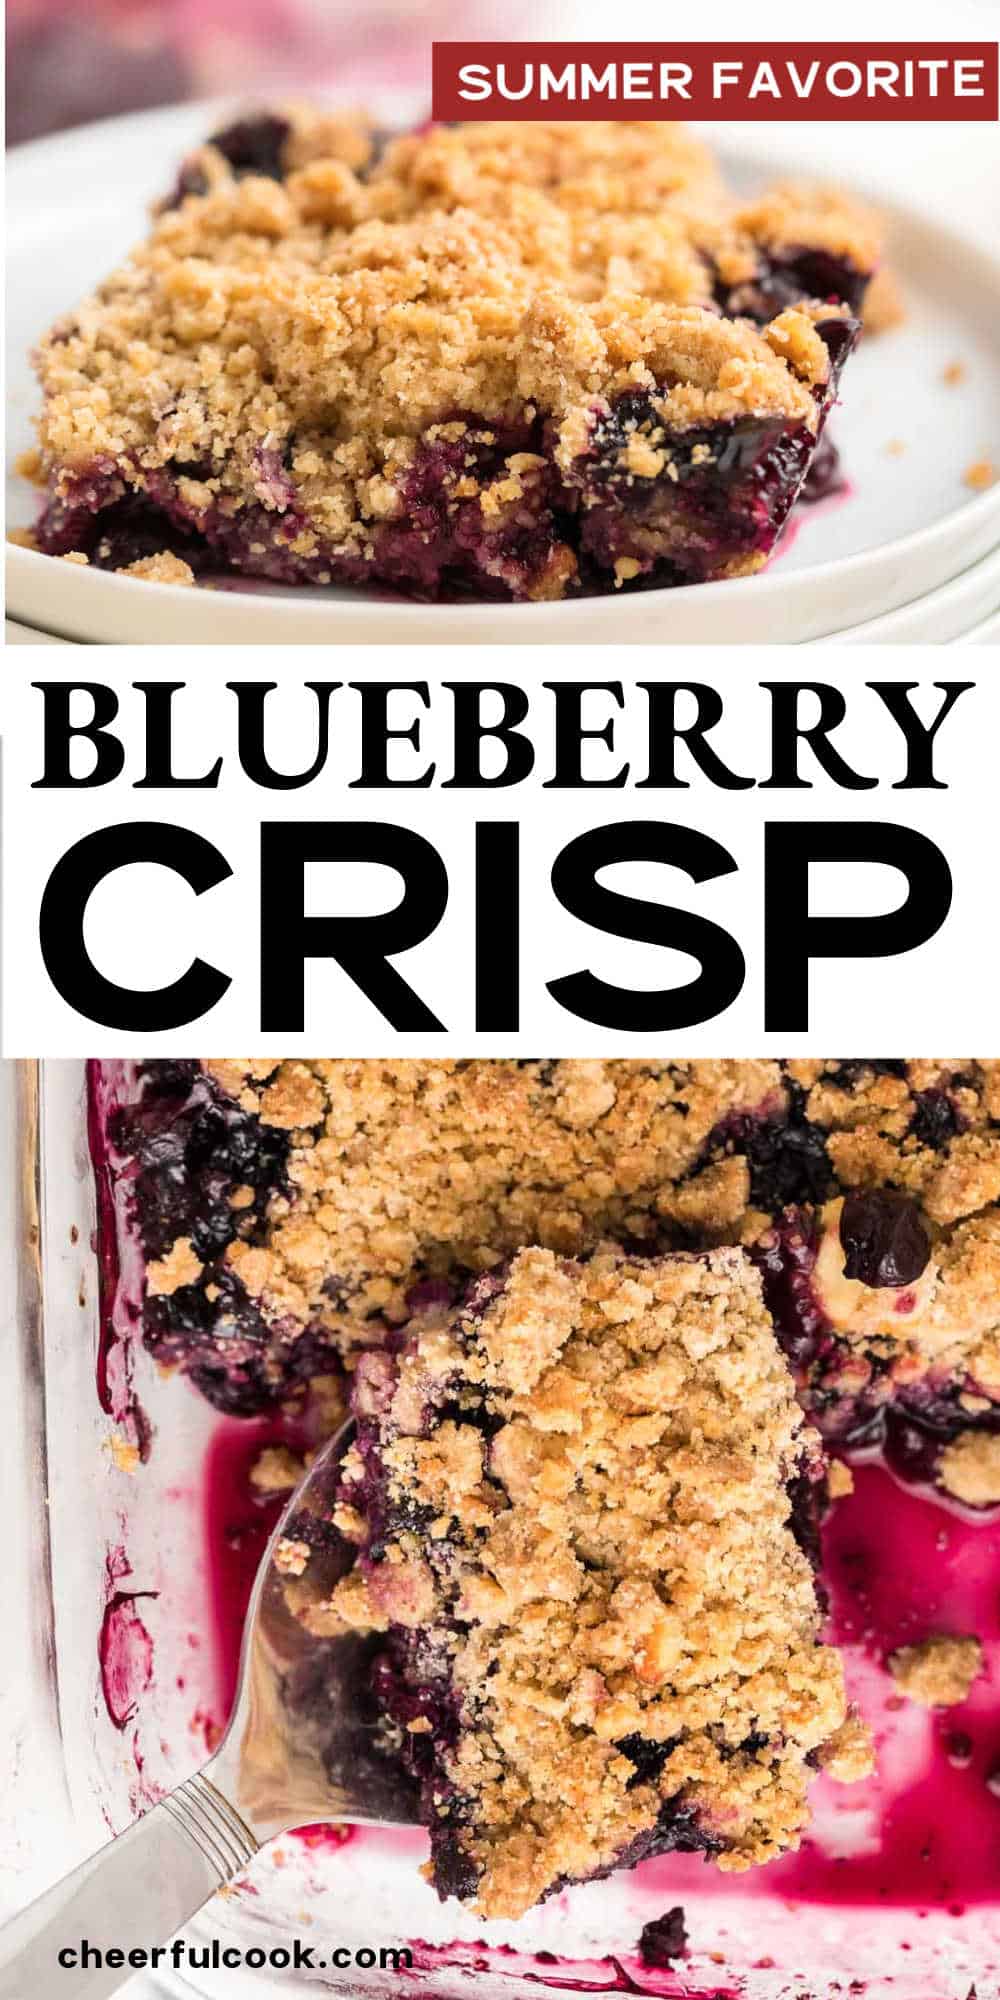 Homemade Blueberry Crisp is an easy-to-make treat that allows you to enjoy dessert even on the busiest days! This effortless dessert takes just five minutes to prep and can be served in under an hour.  #cheerfulcook #blueberrycrisp #recipe #easy #dessert  via @cheerfulcook